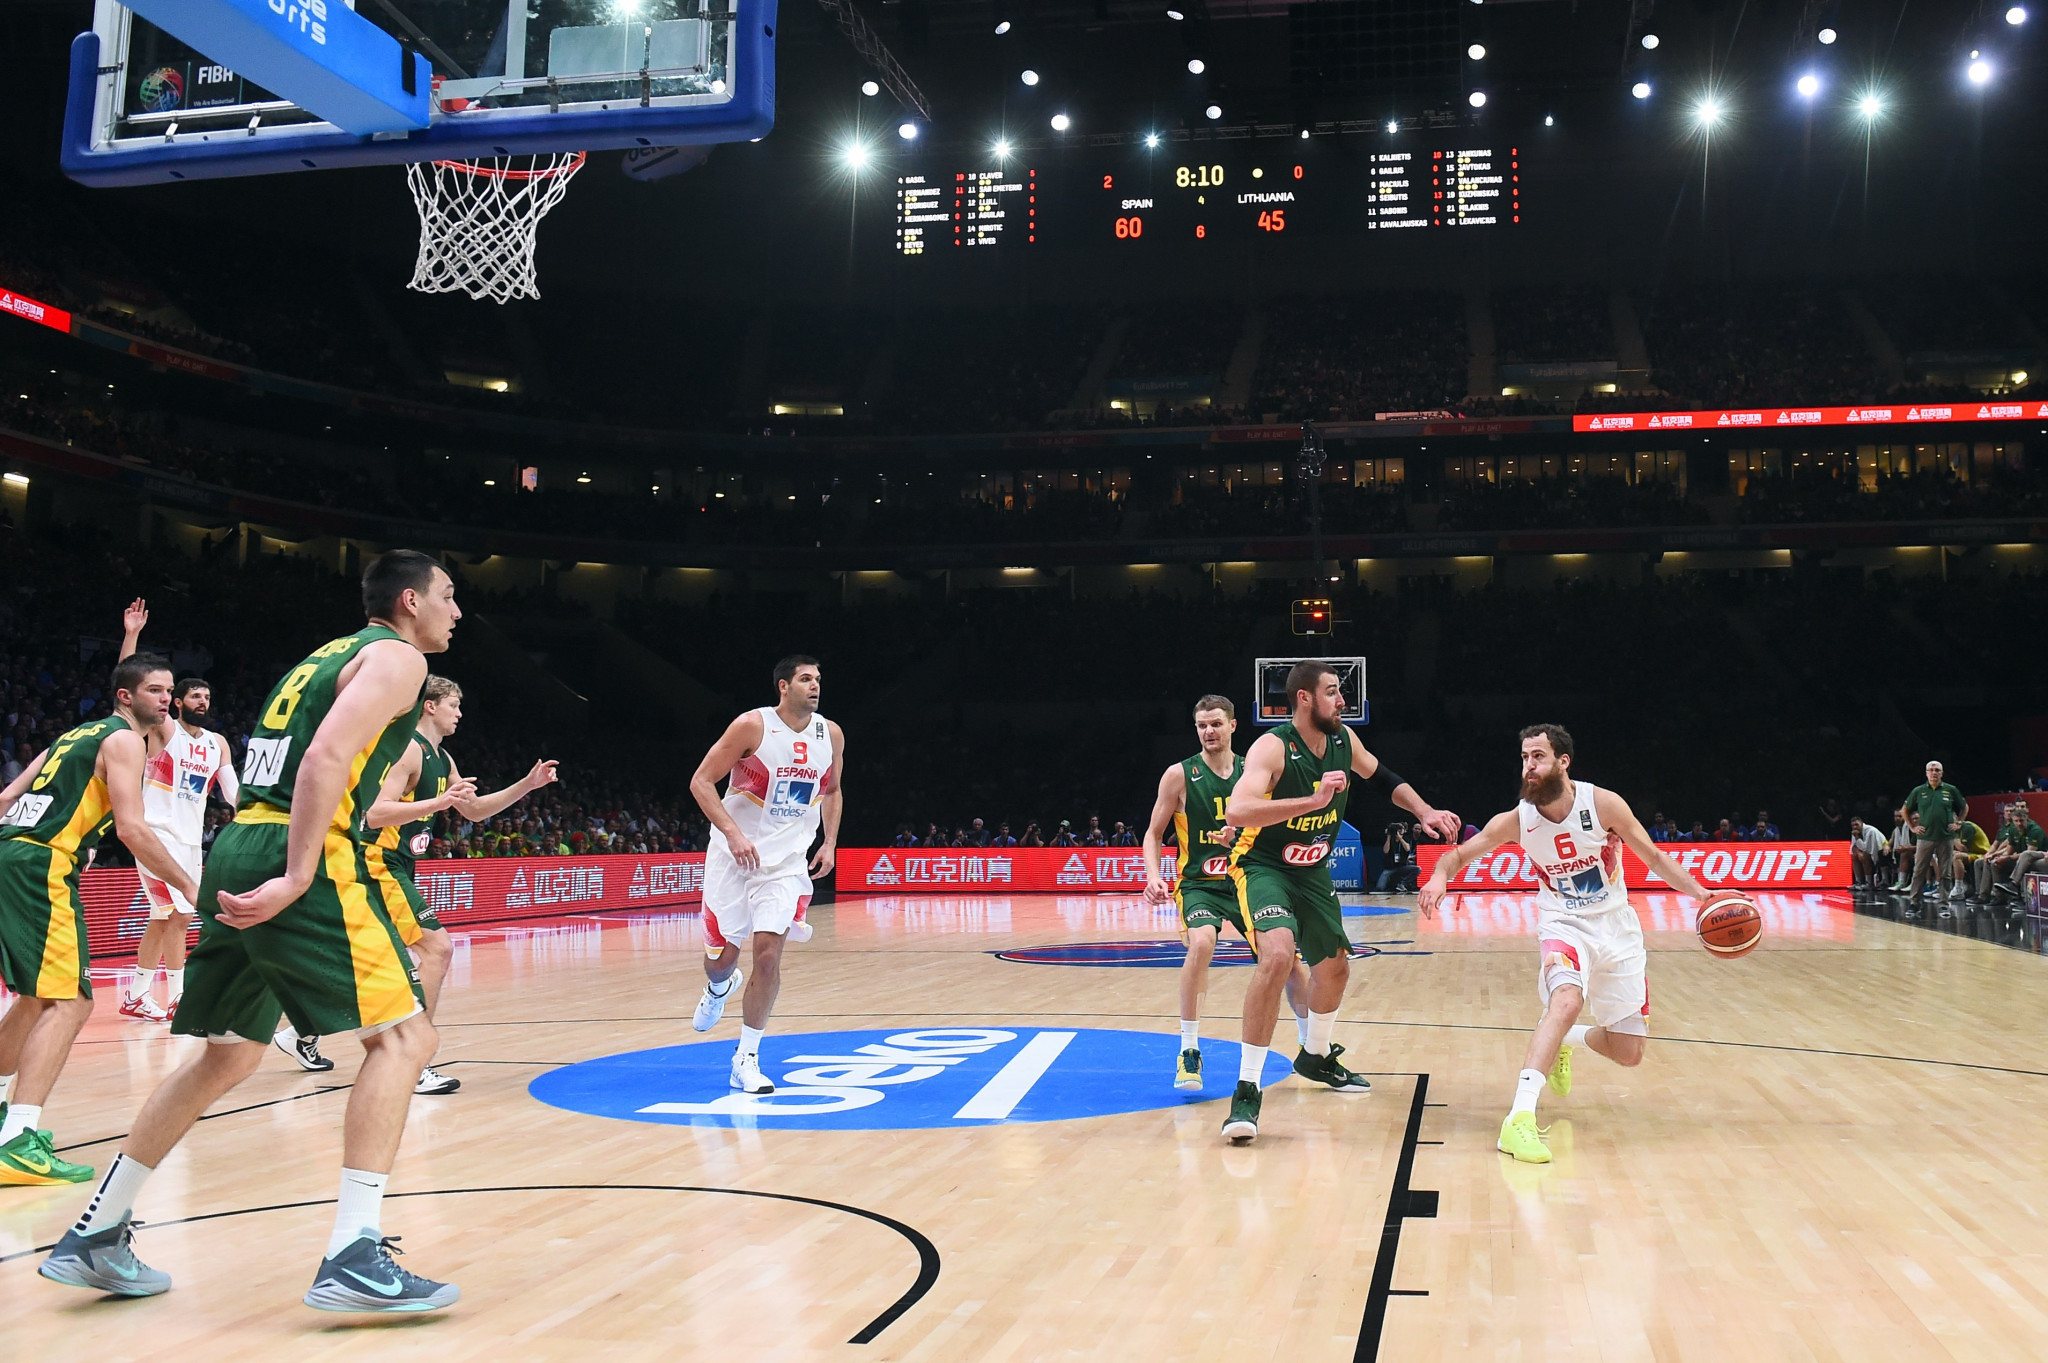 The Stade Pierre-Mauroy has previously held knockout matches at EuroBasket 2015, and Andreas Zagklis said it would be "possible to increase the total number of spectators for basketball" ©Getty Images